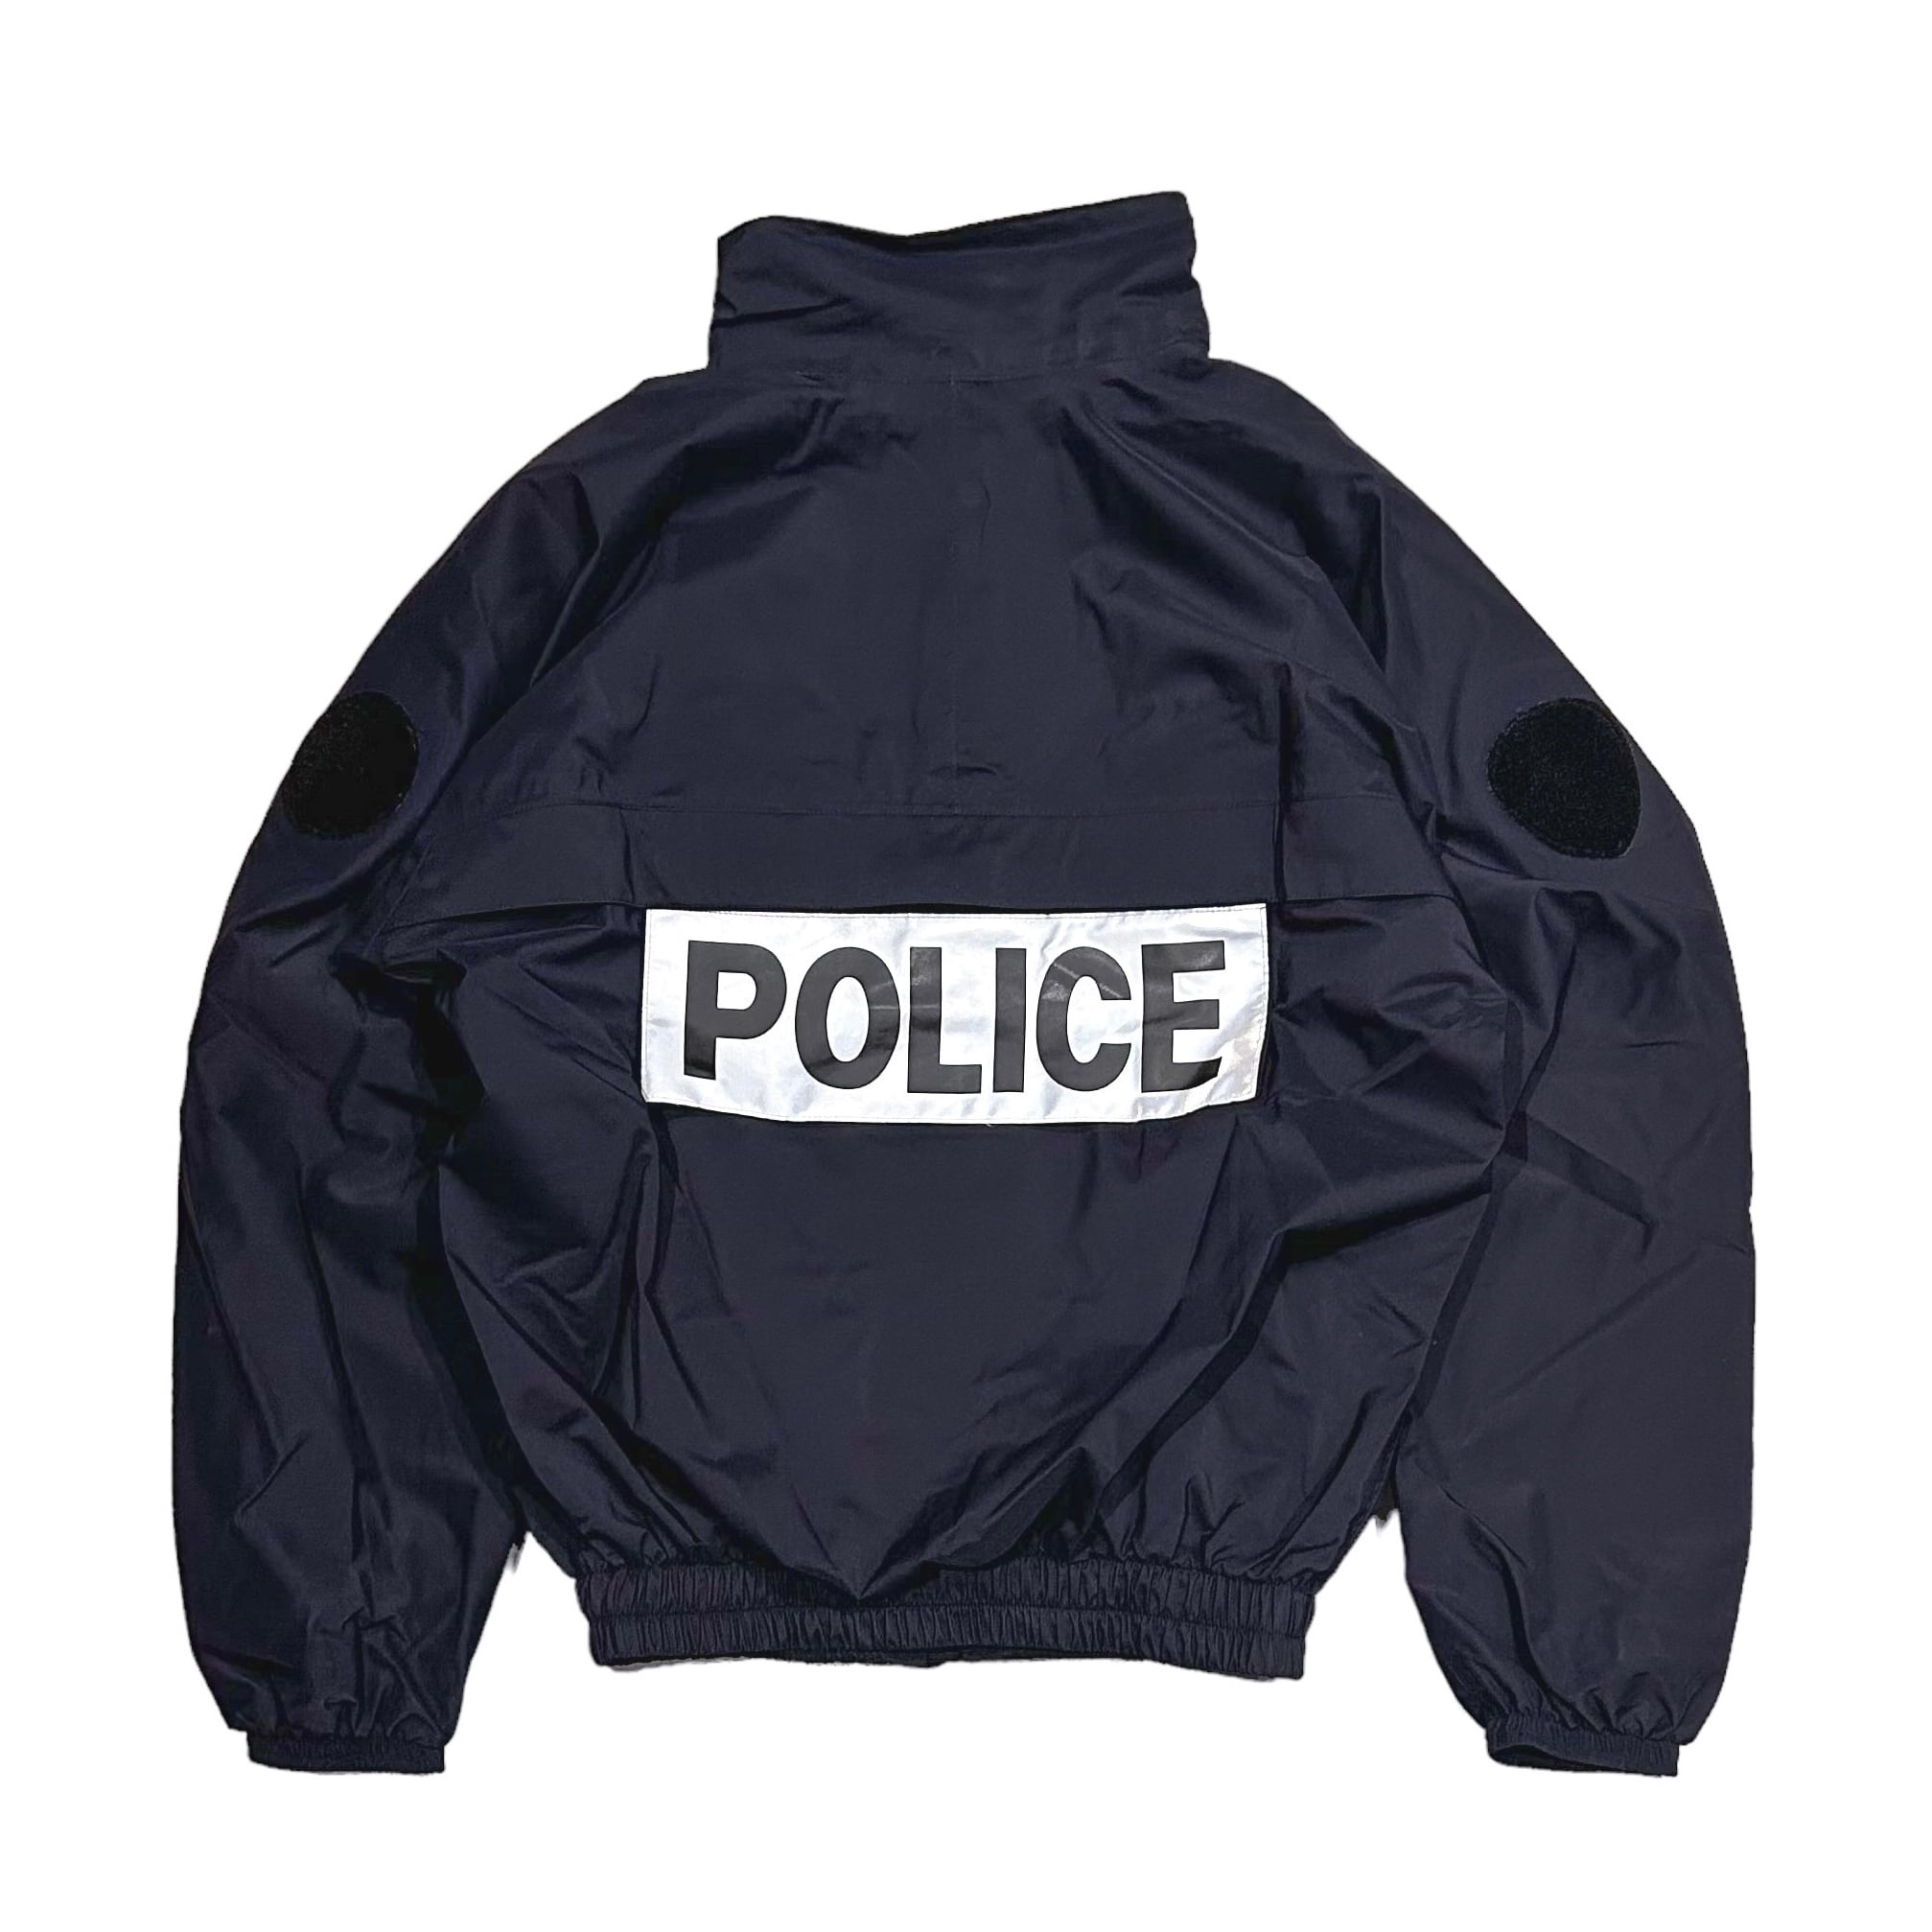 French Police Waterproof Armor Jacket